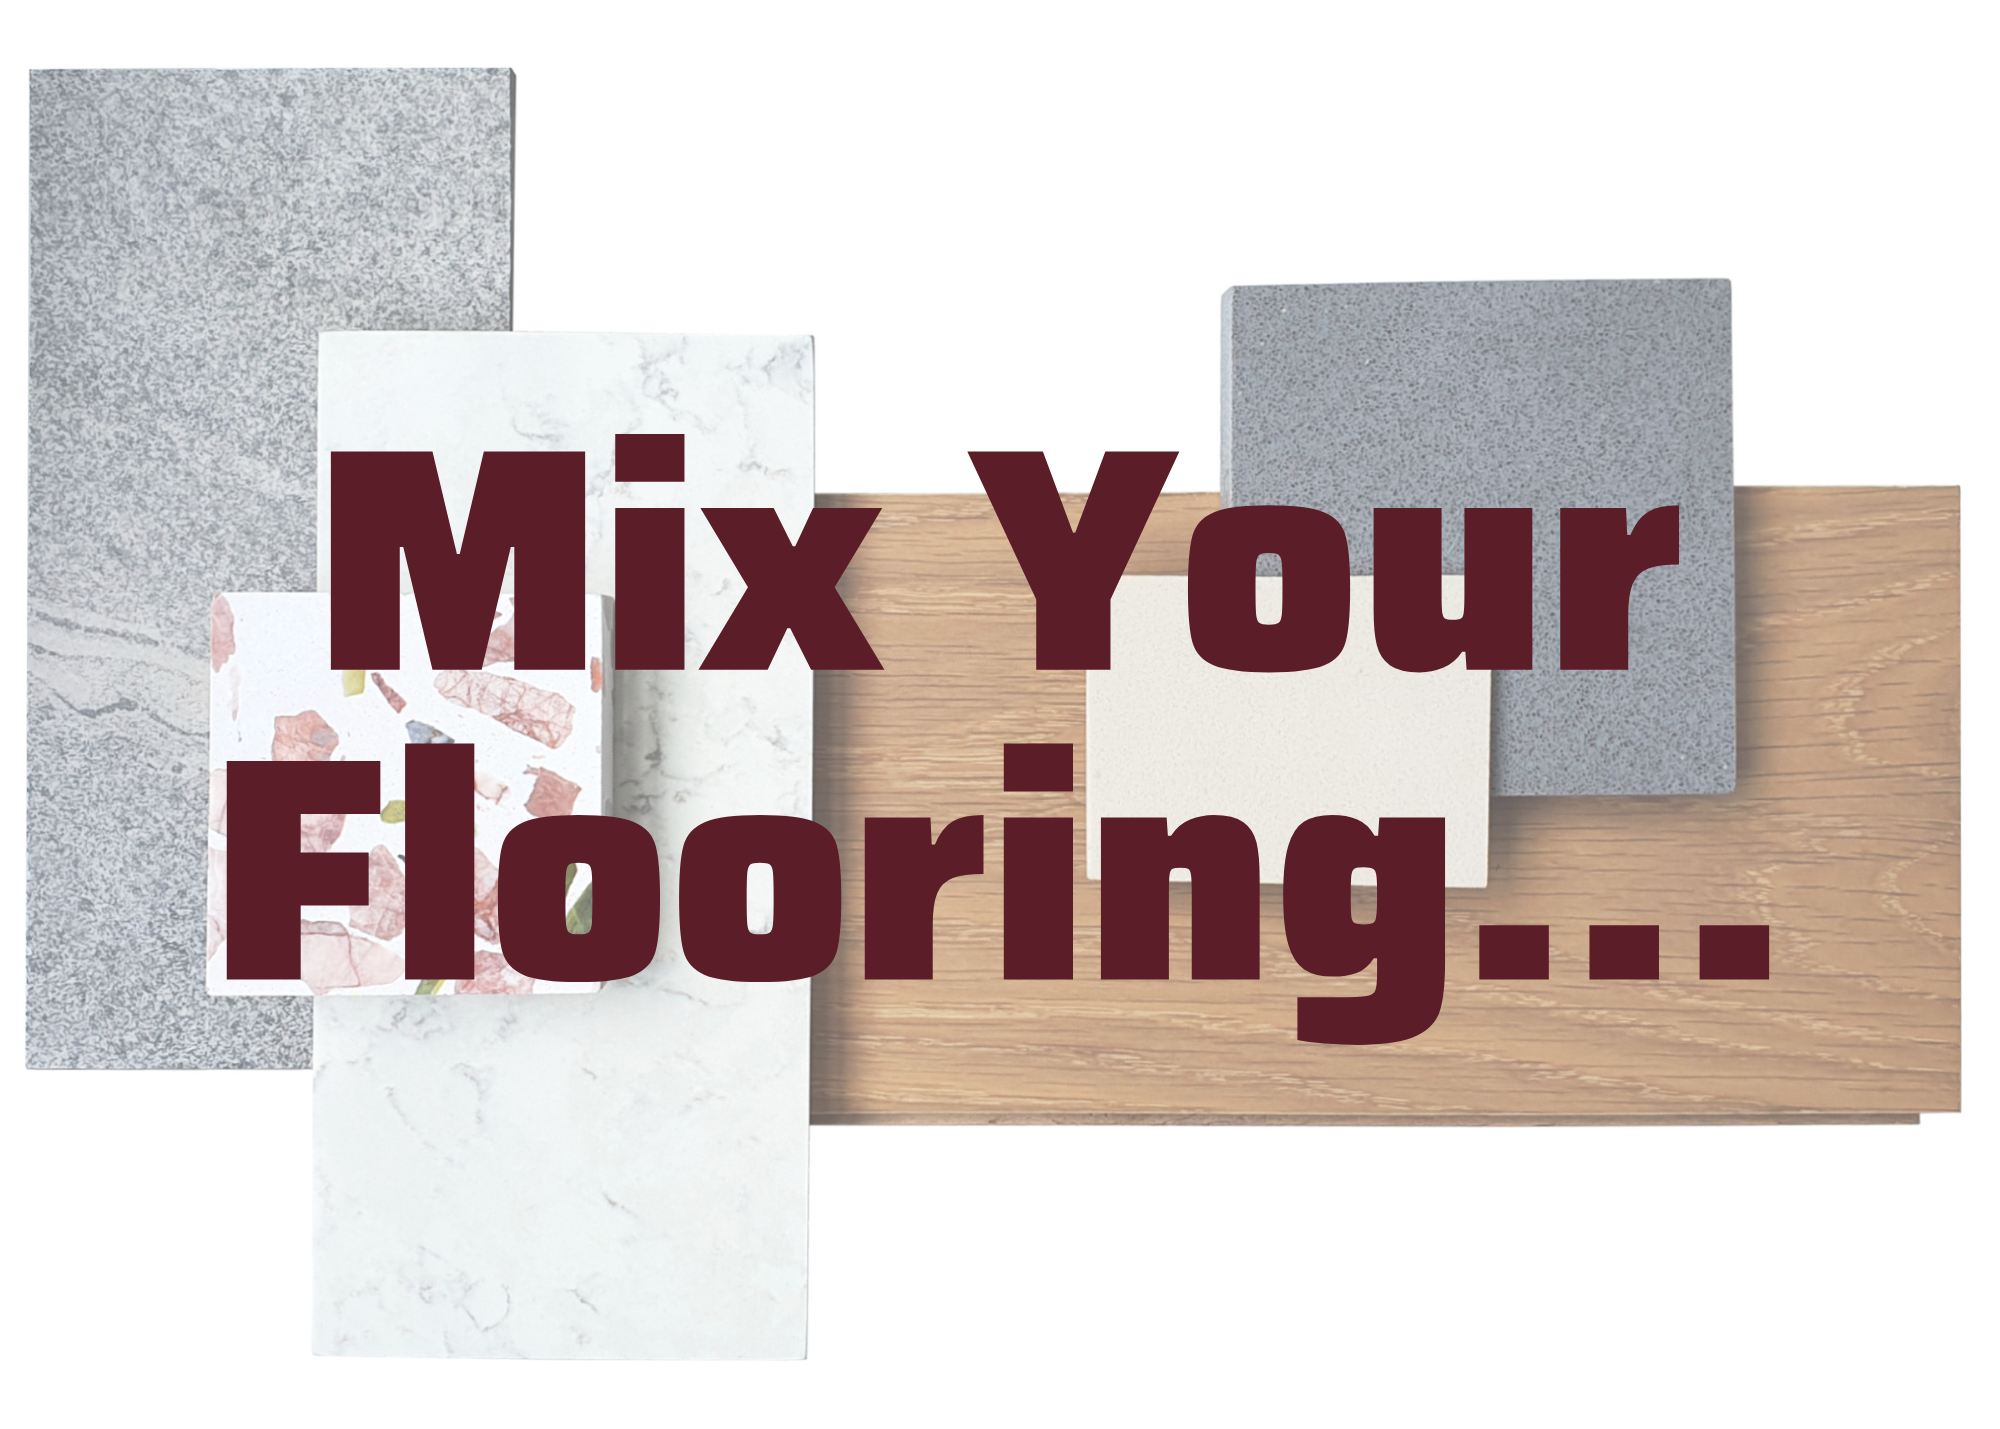 "Mix Your Flooring..." written by Graham's Fort Collins.